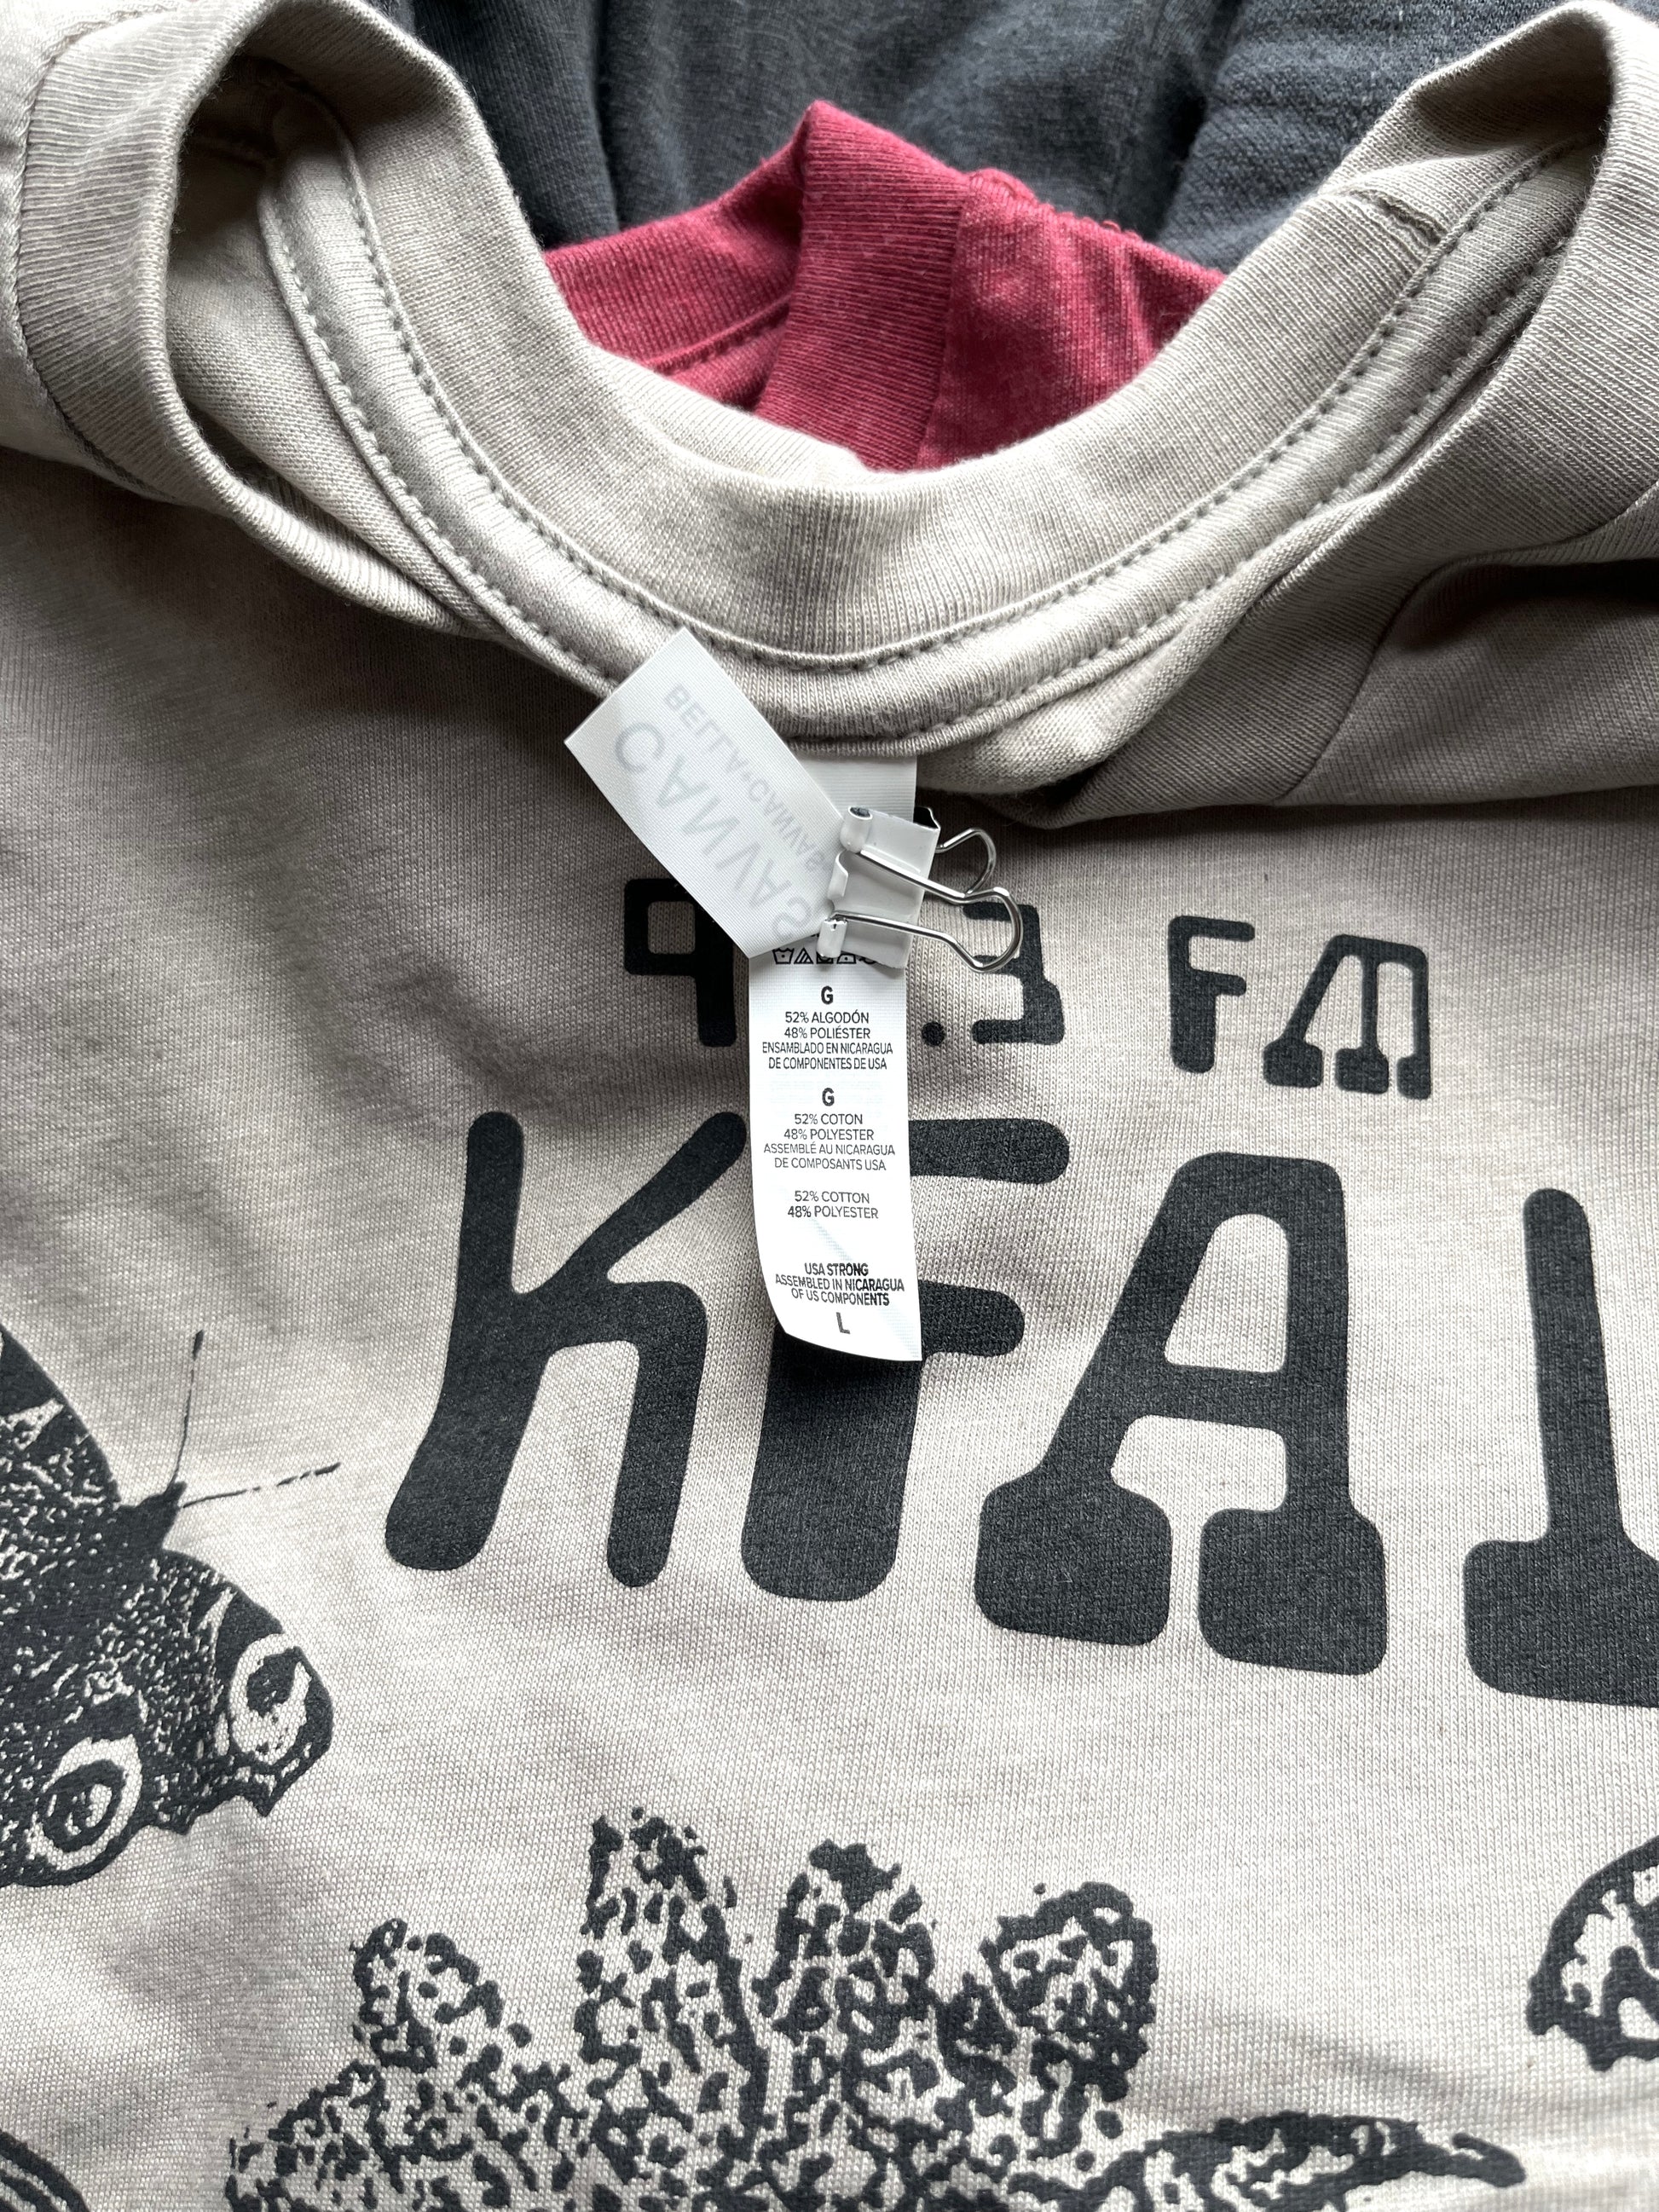 Photo of the garment tag: 52% Airlume combed and ring-spun cotton, 48% polyester, 32 singles, 4.2 oz